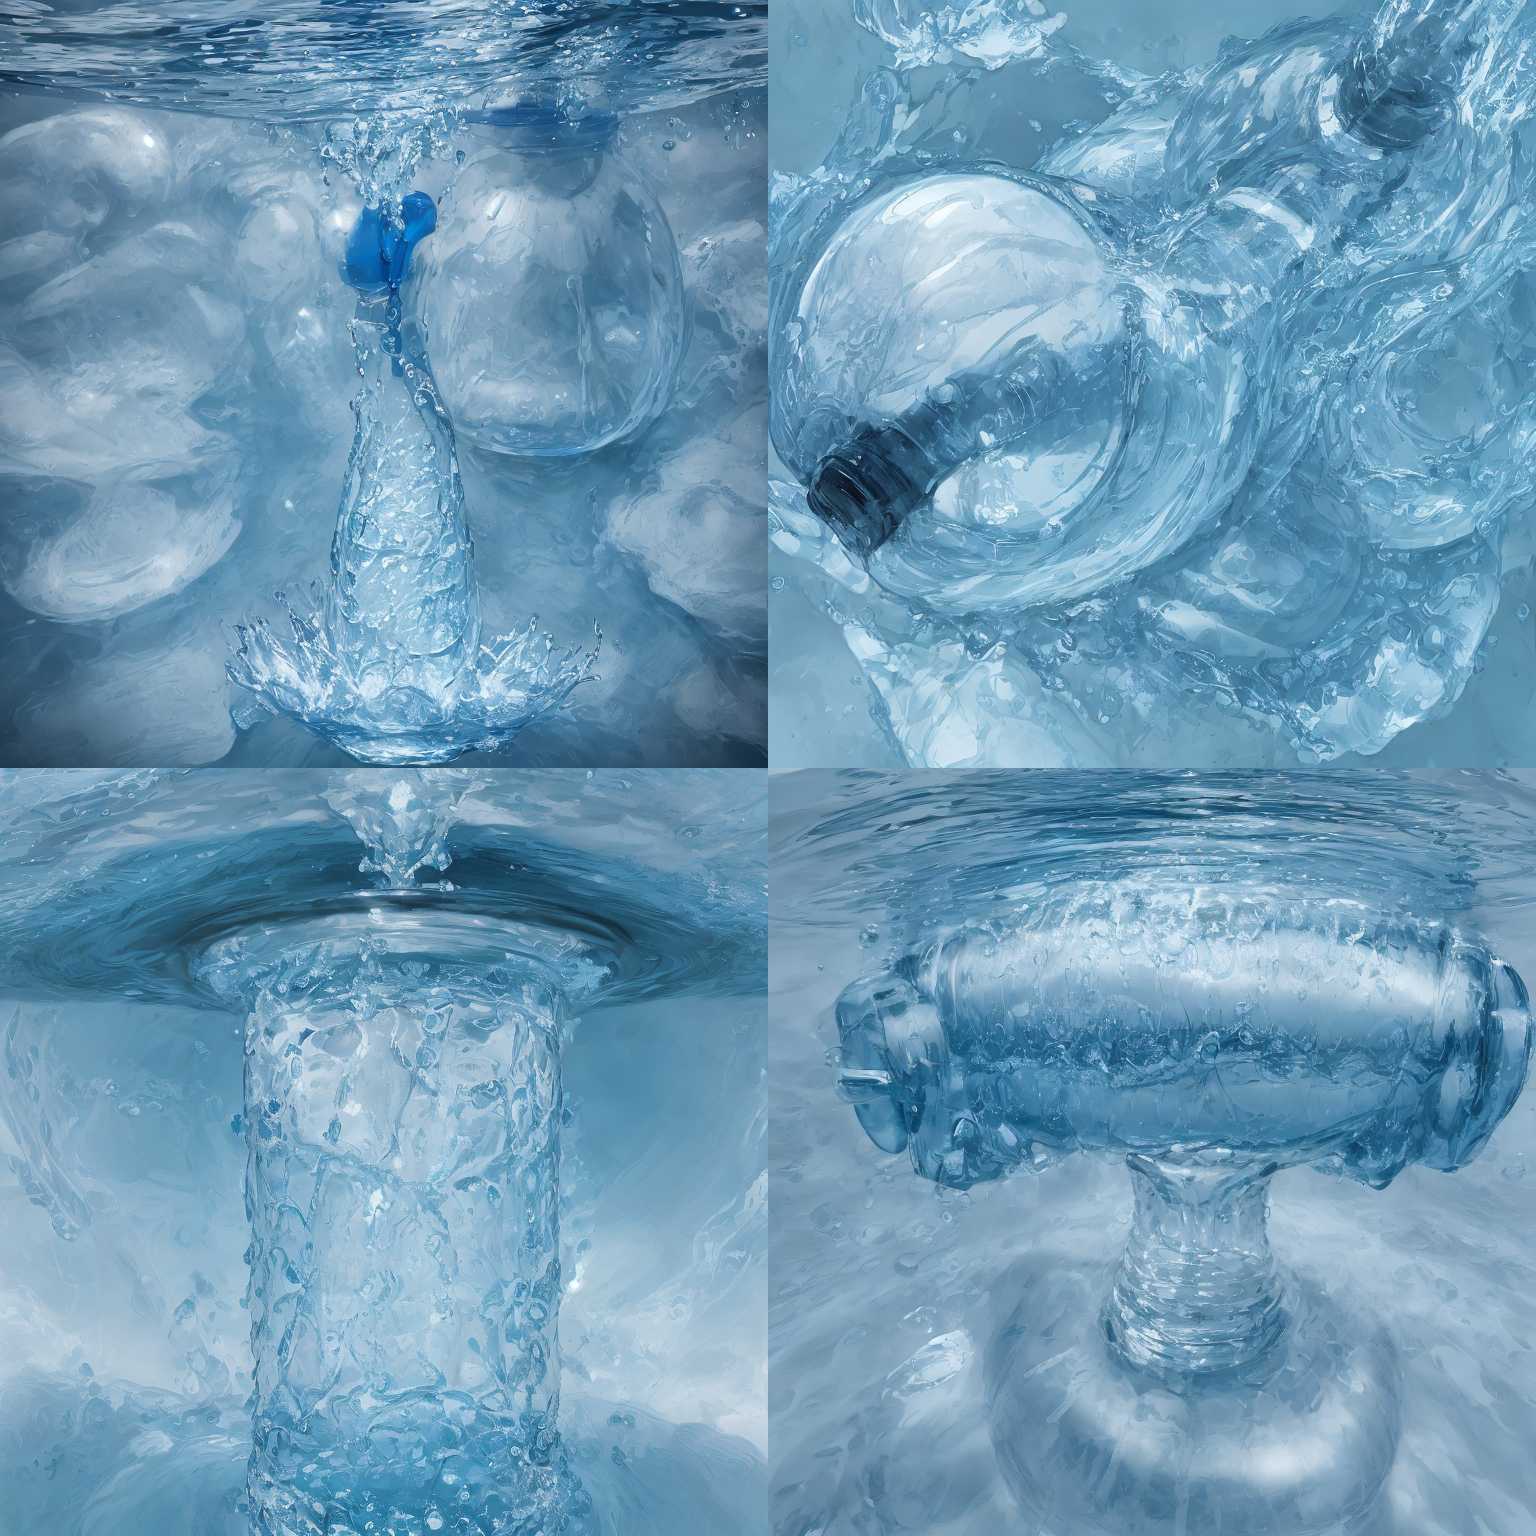 An uncapped water bottle turning upside down